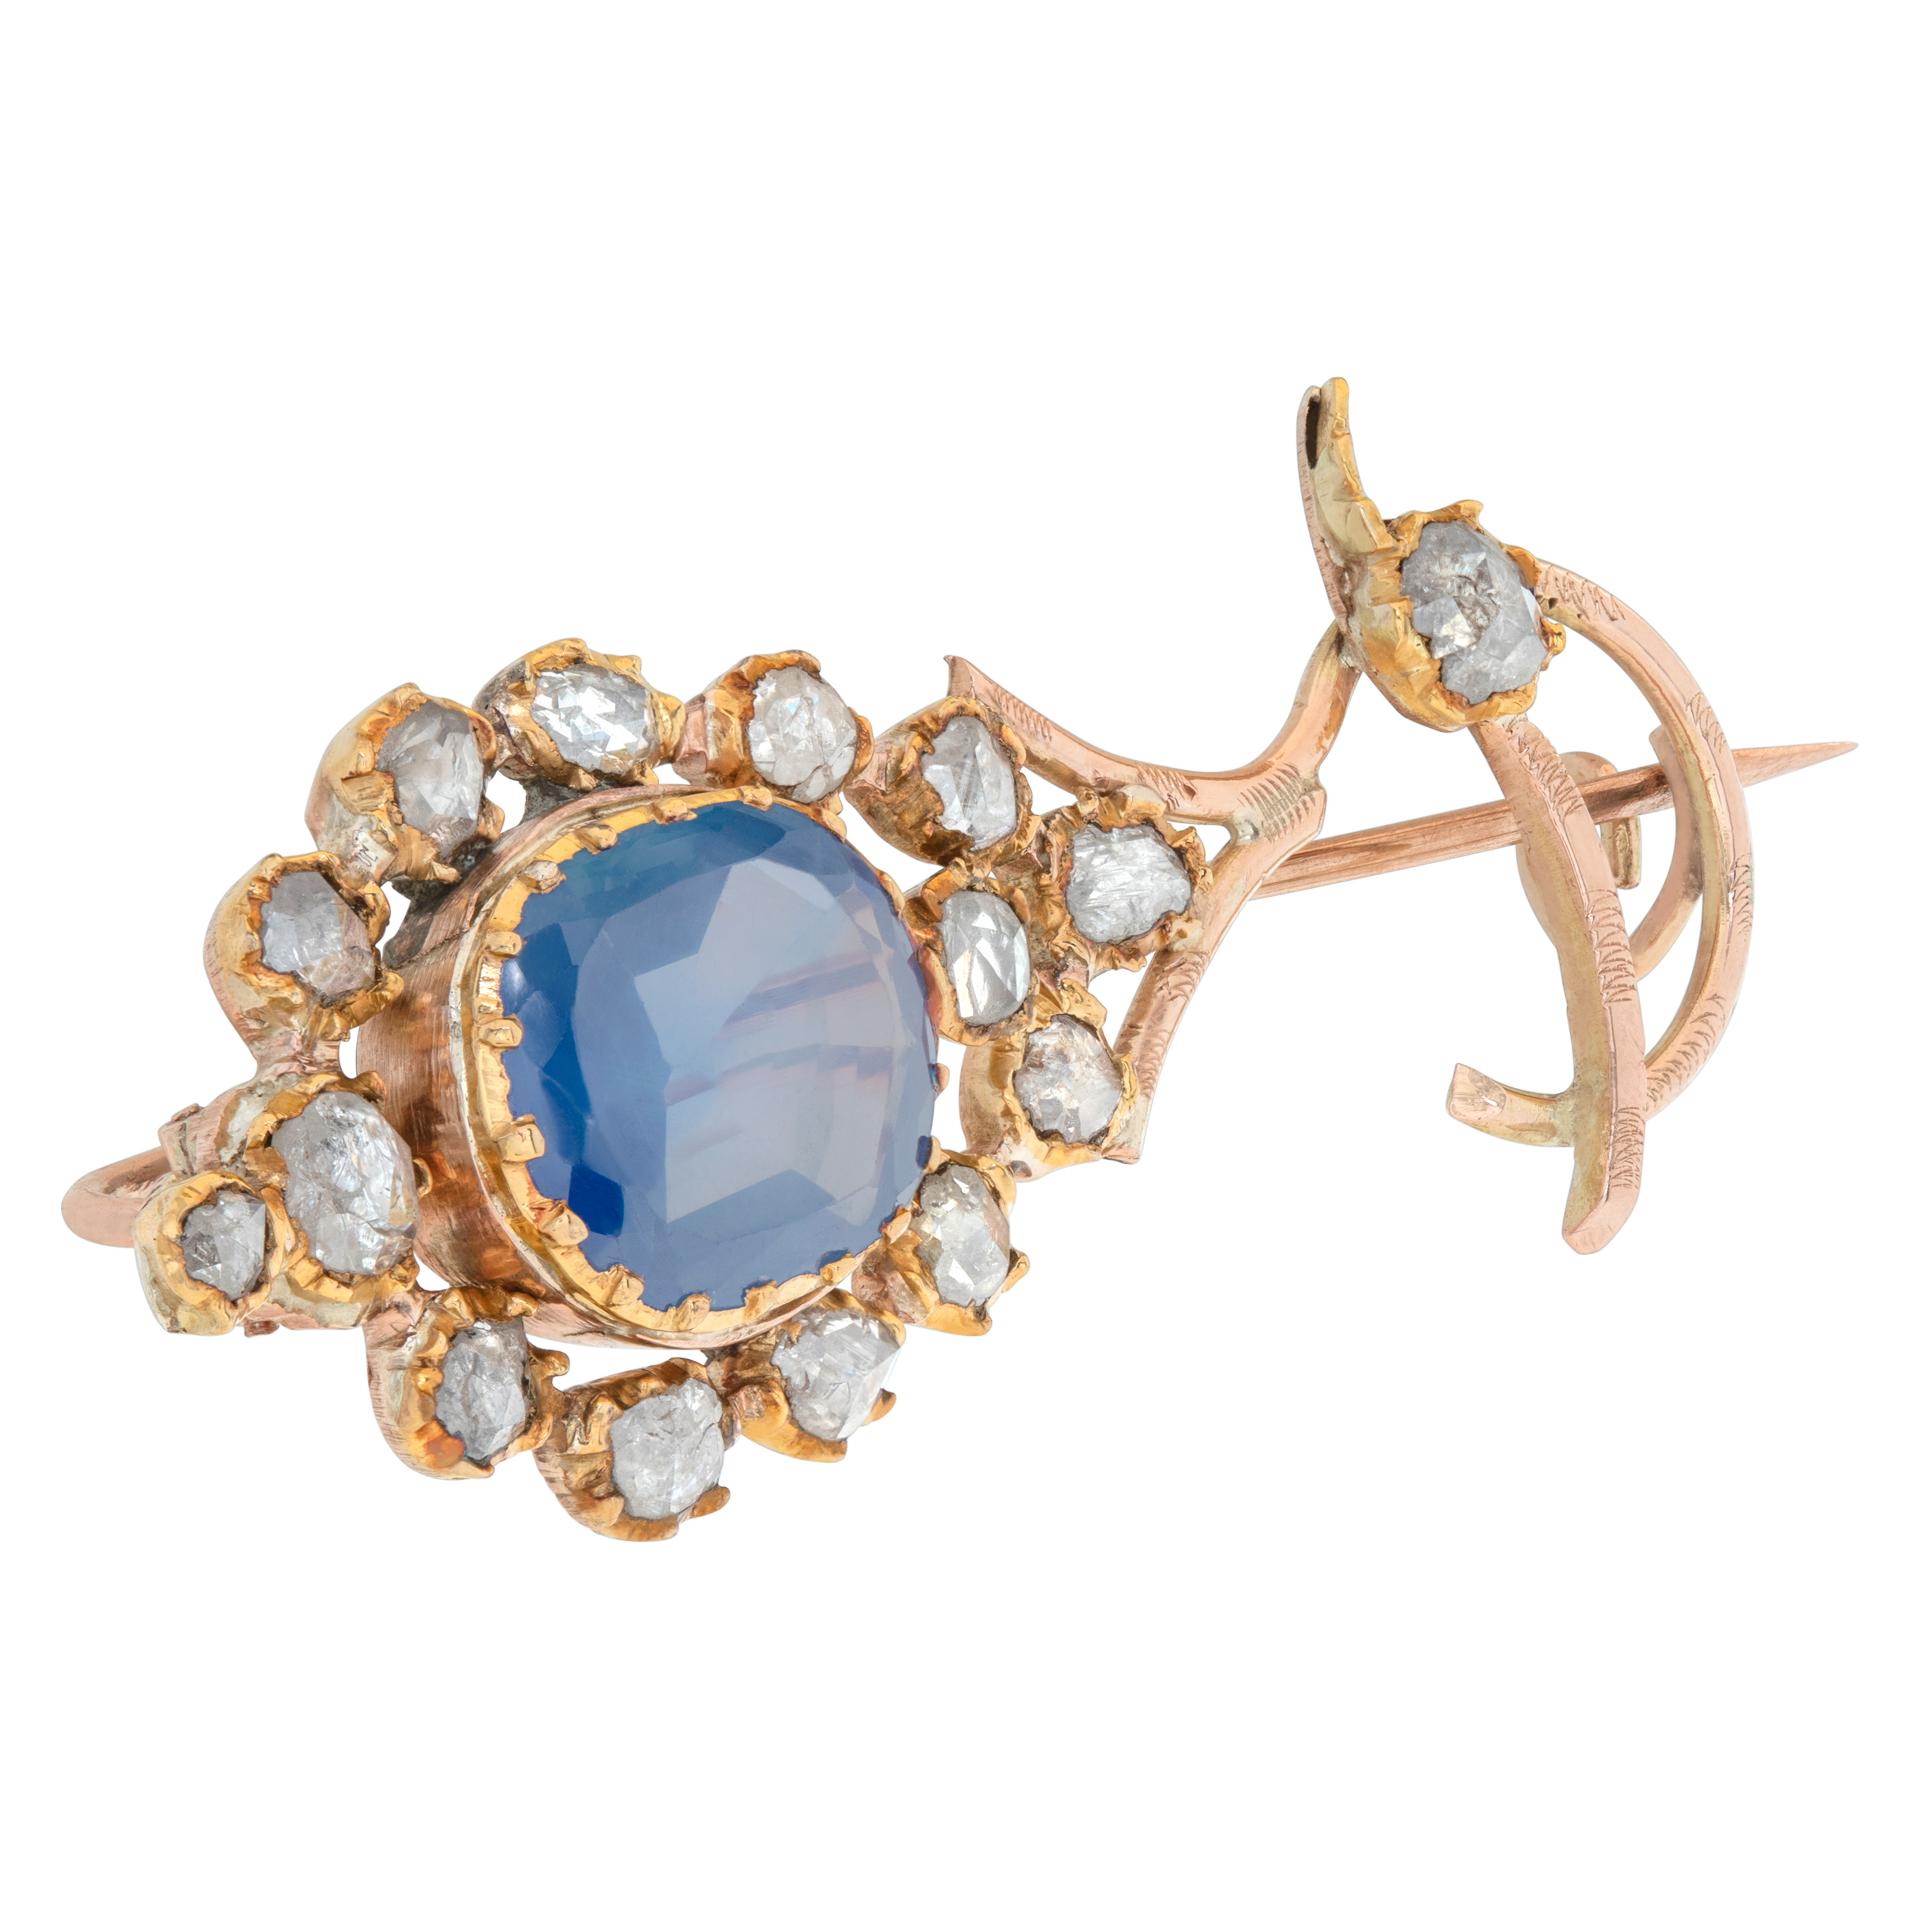 Antique European Brooch circa 1800s Diamond and Sapphire Set in 18k Yellow Gold In Excellent Condition For Sale In Surfside, FL